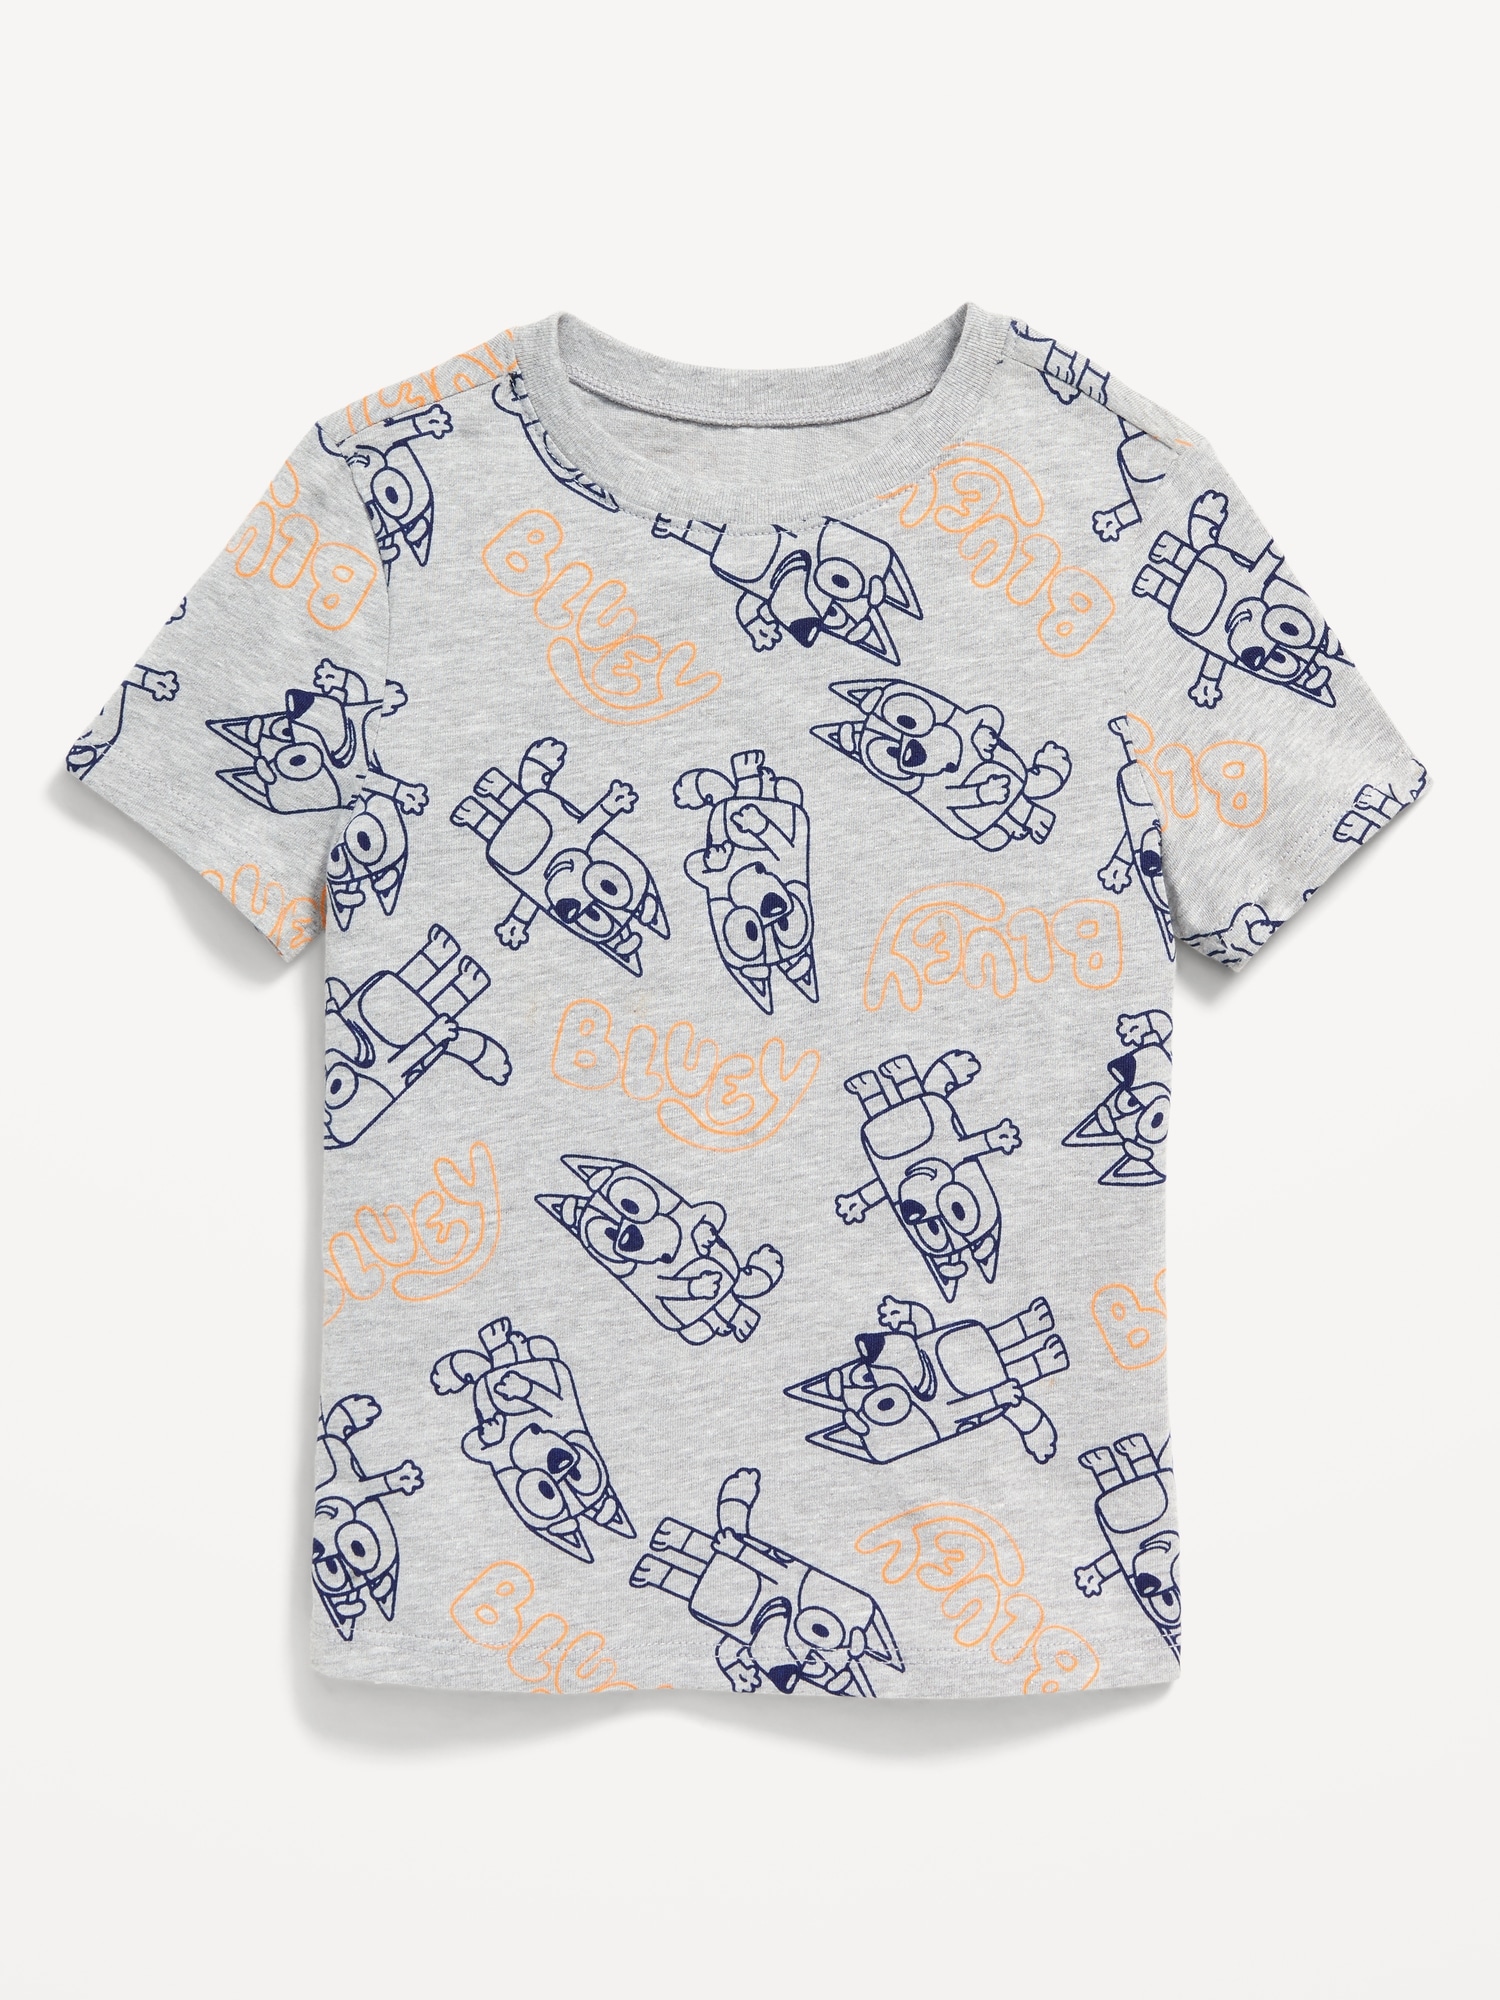 Old Navy Bluey Unisex Graphic T-Shirt for Toddler - - Size 3T